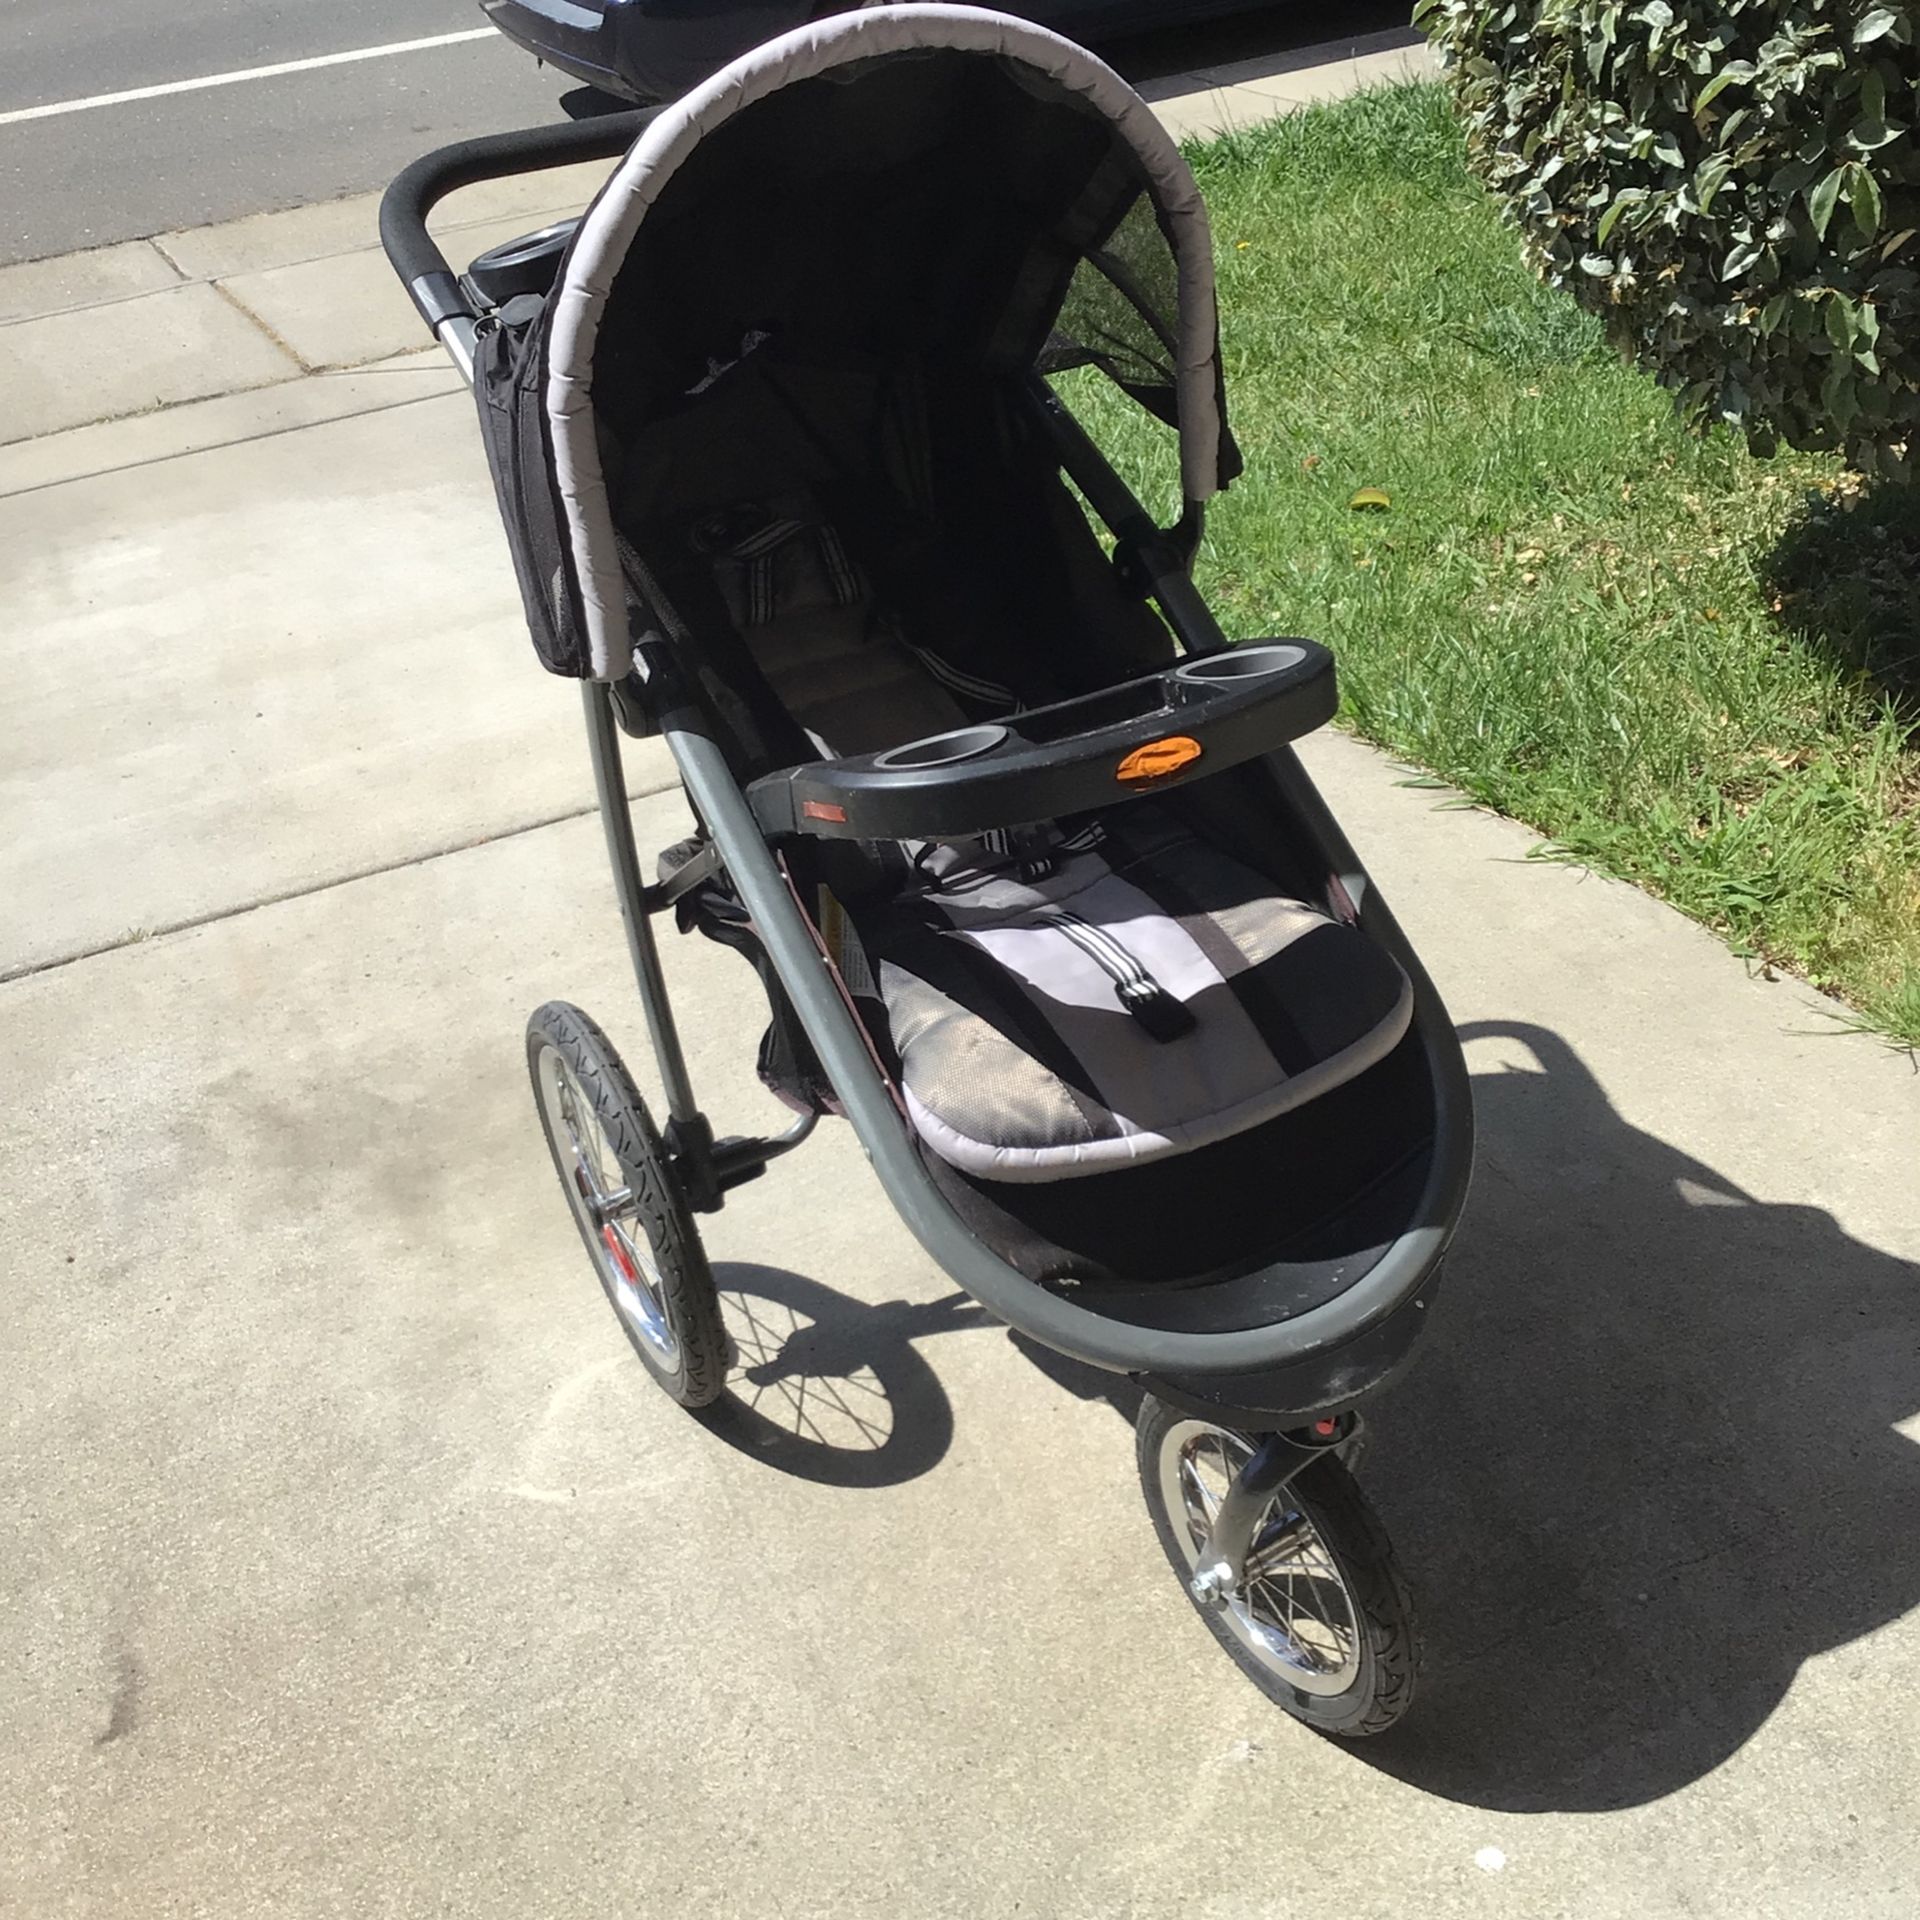 Baby Jogging Stroller Very Good Condition Easy To Fold